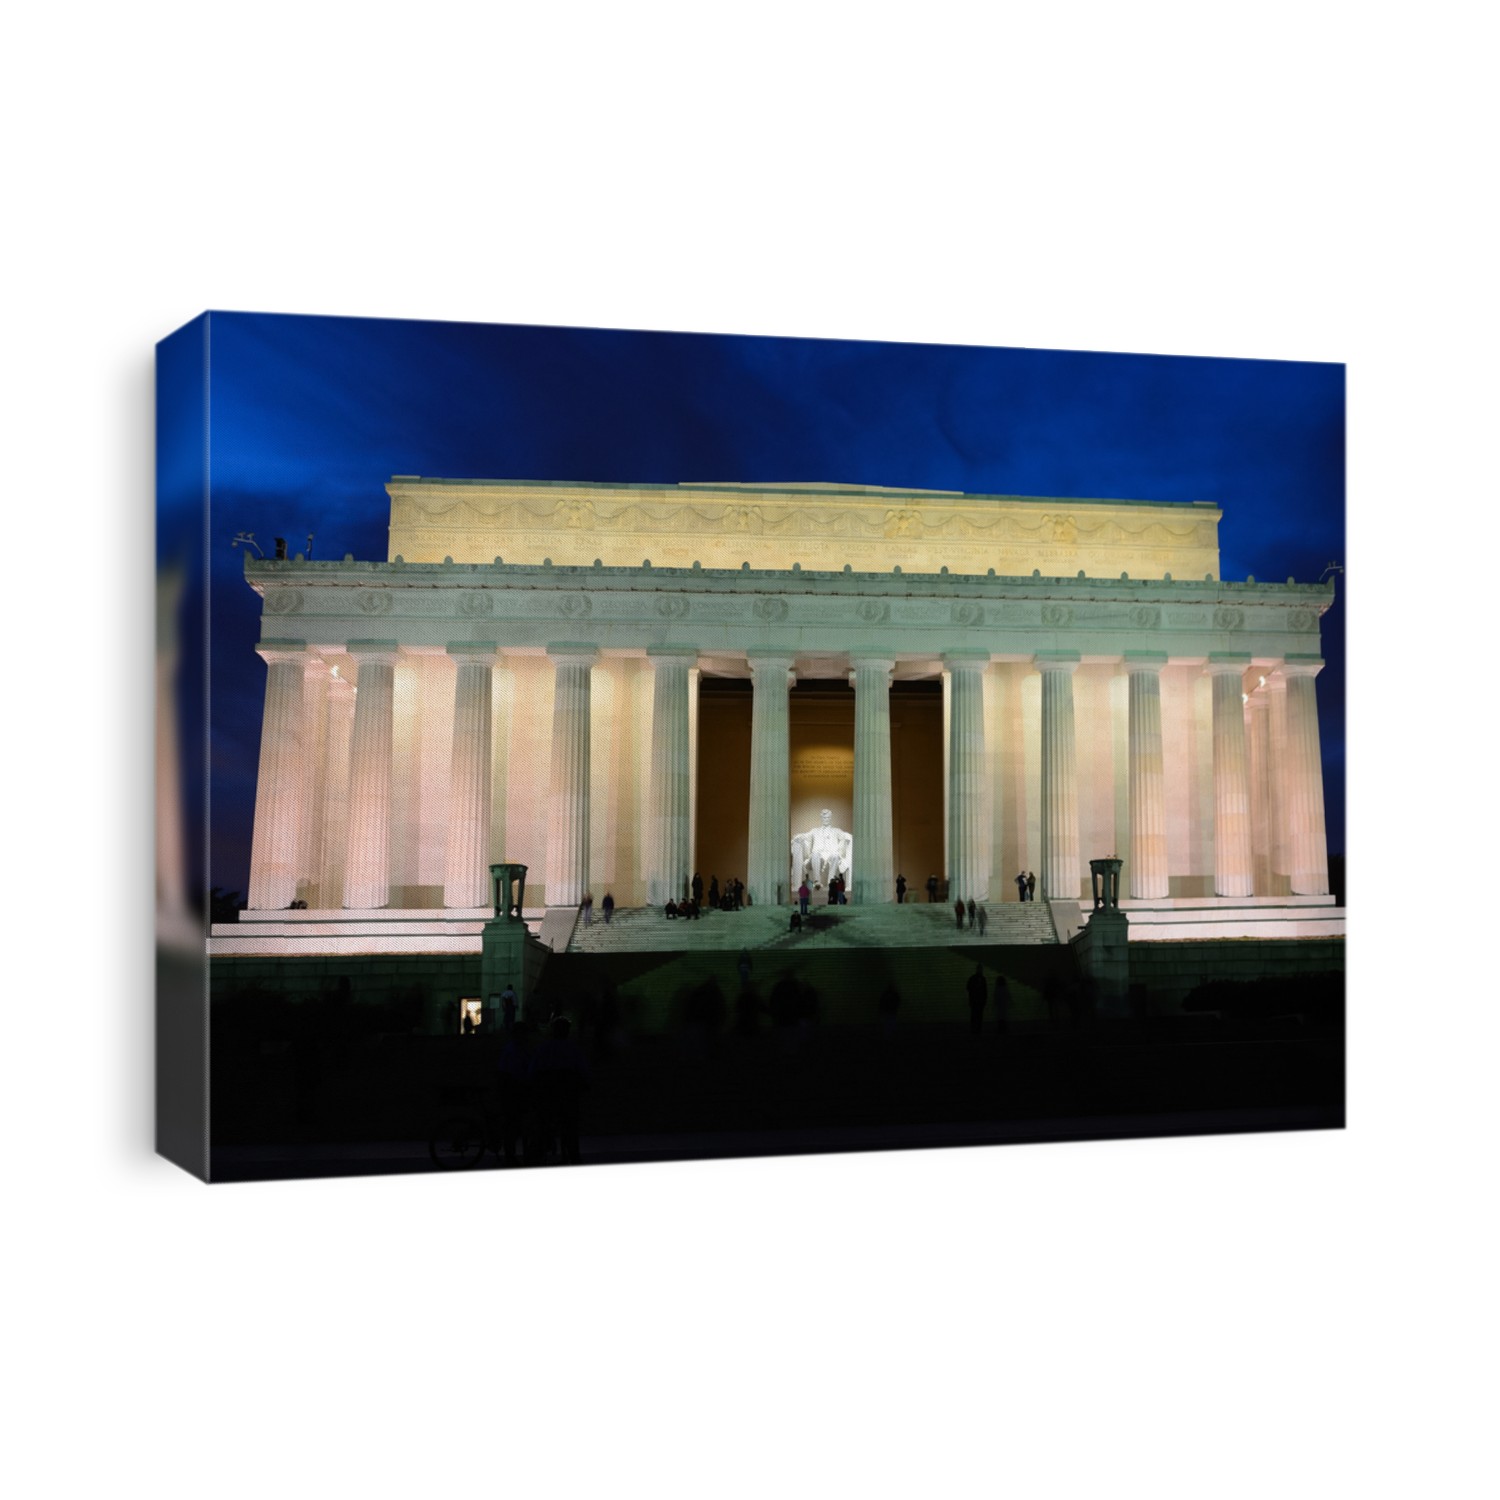 Washington DC, Abraham Lincoln Memorial in a blue night, United States